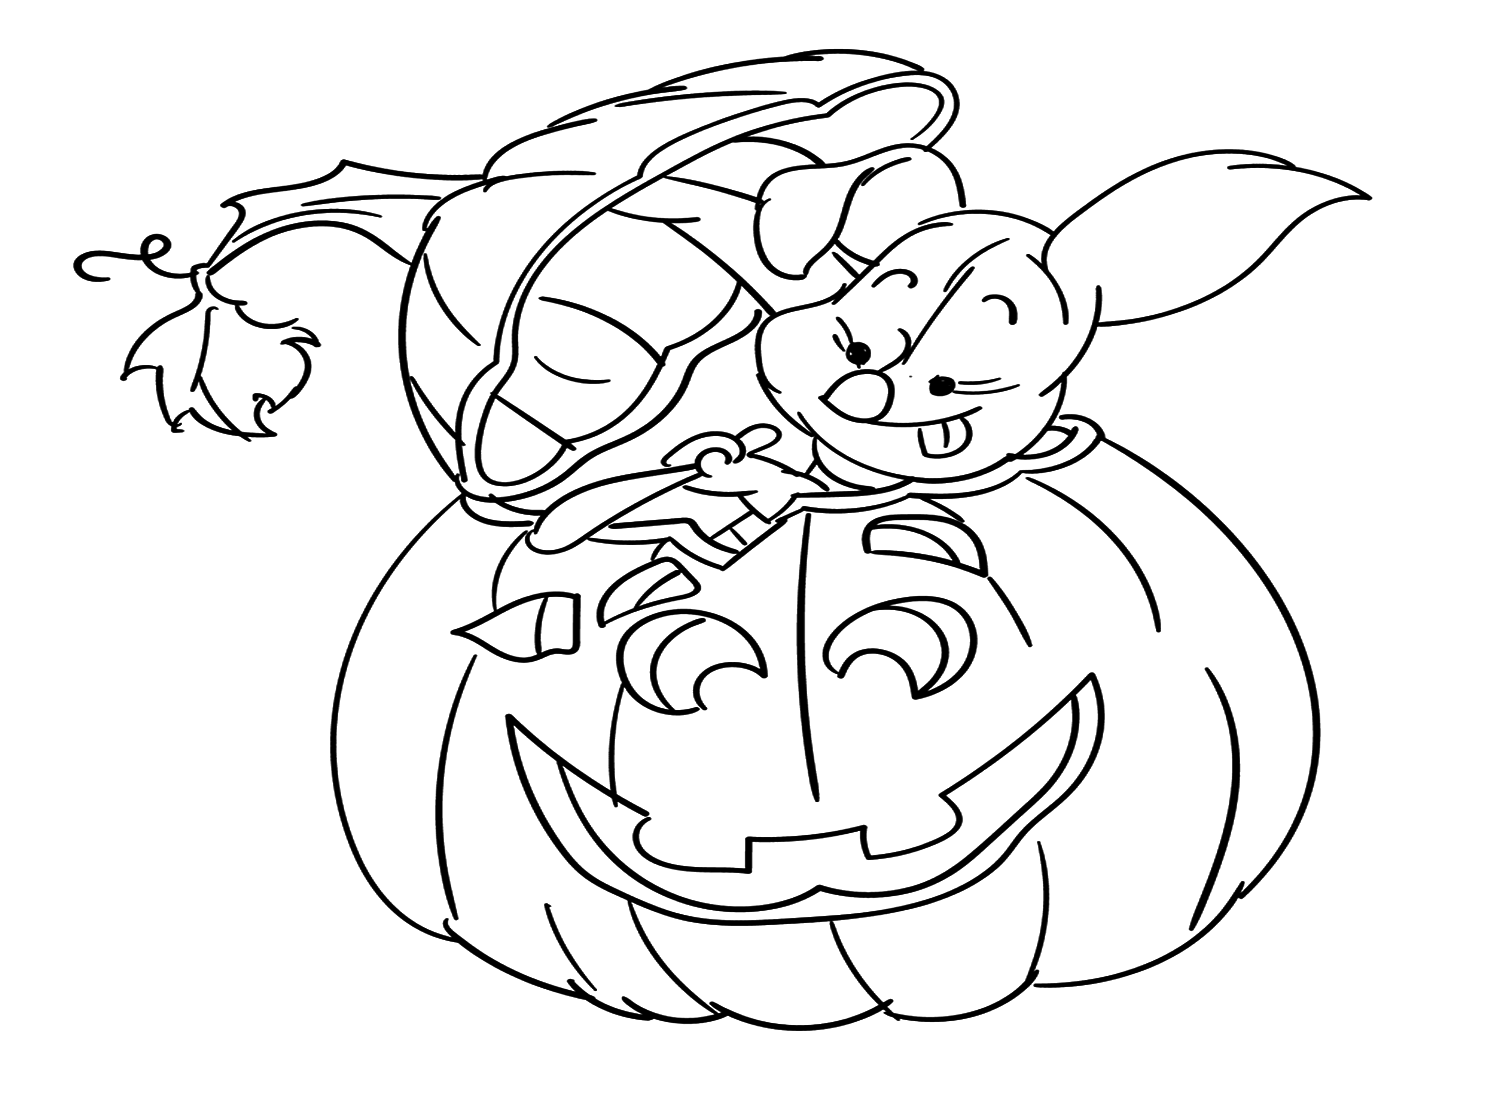 The Piglet Carving Halloween Pumpkin Coloring Page